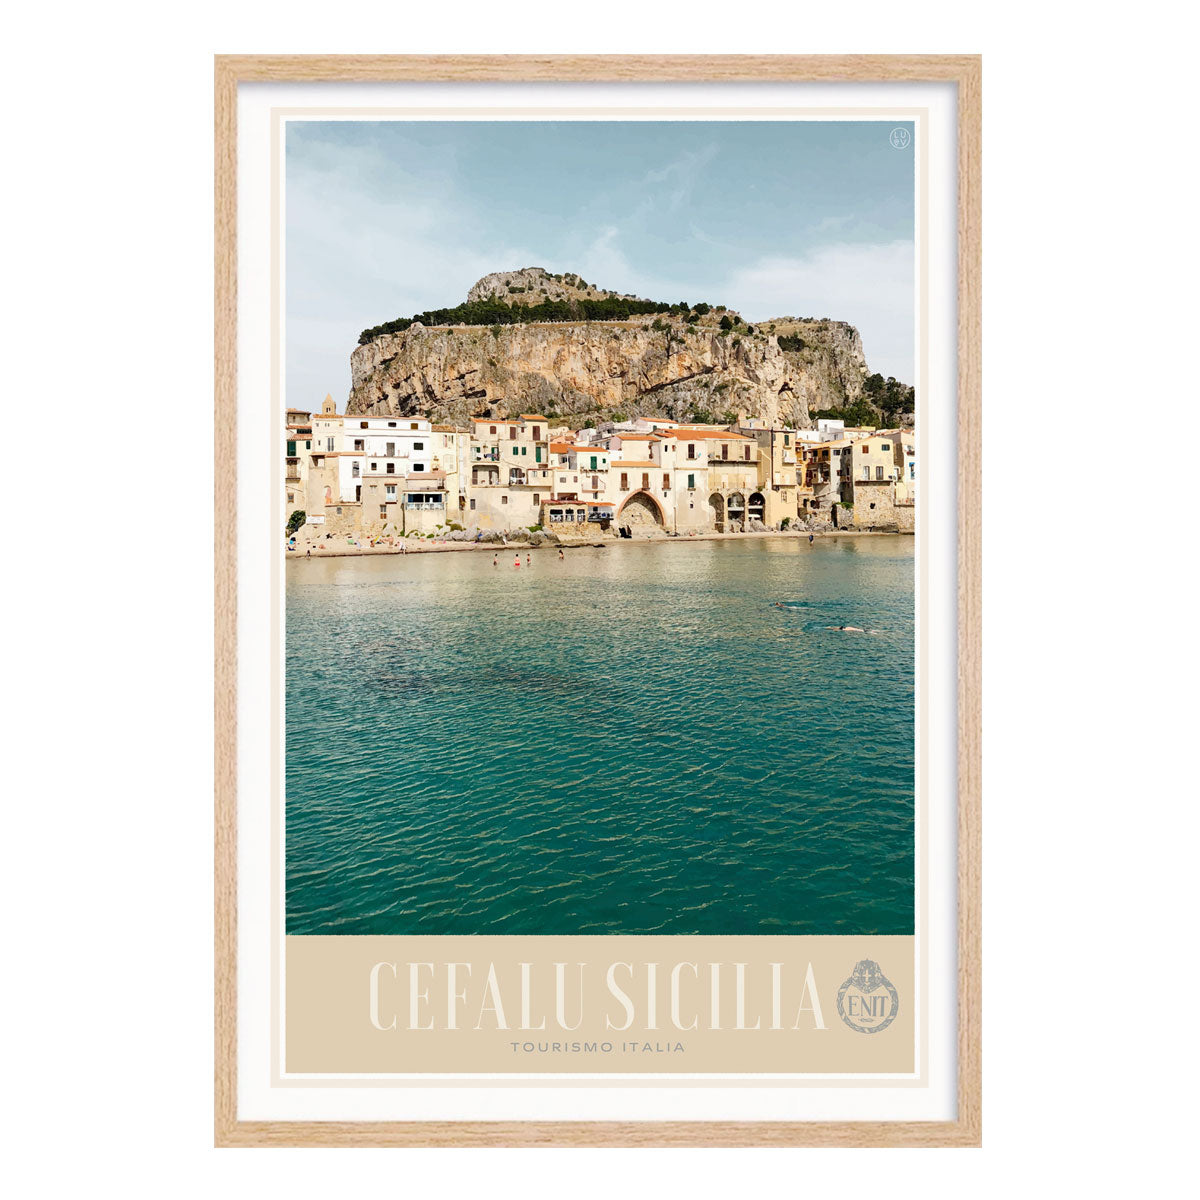 Cefalu Sicily retro vintage poster print in oak frame from Places We Luv